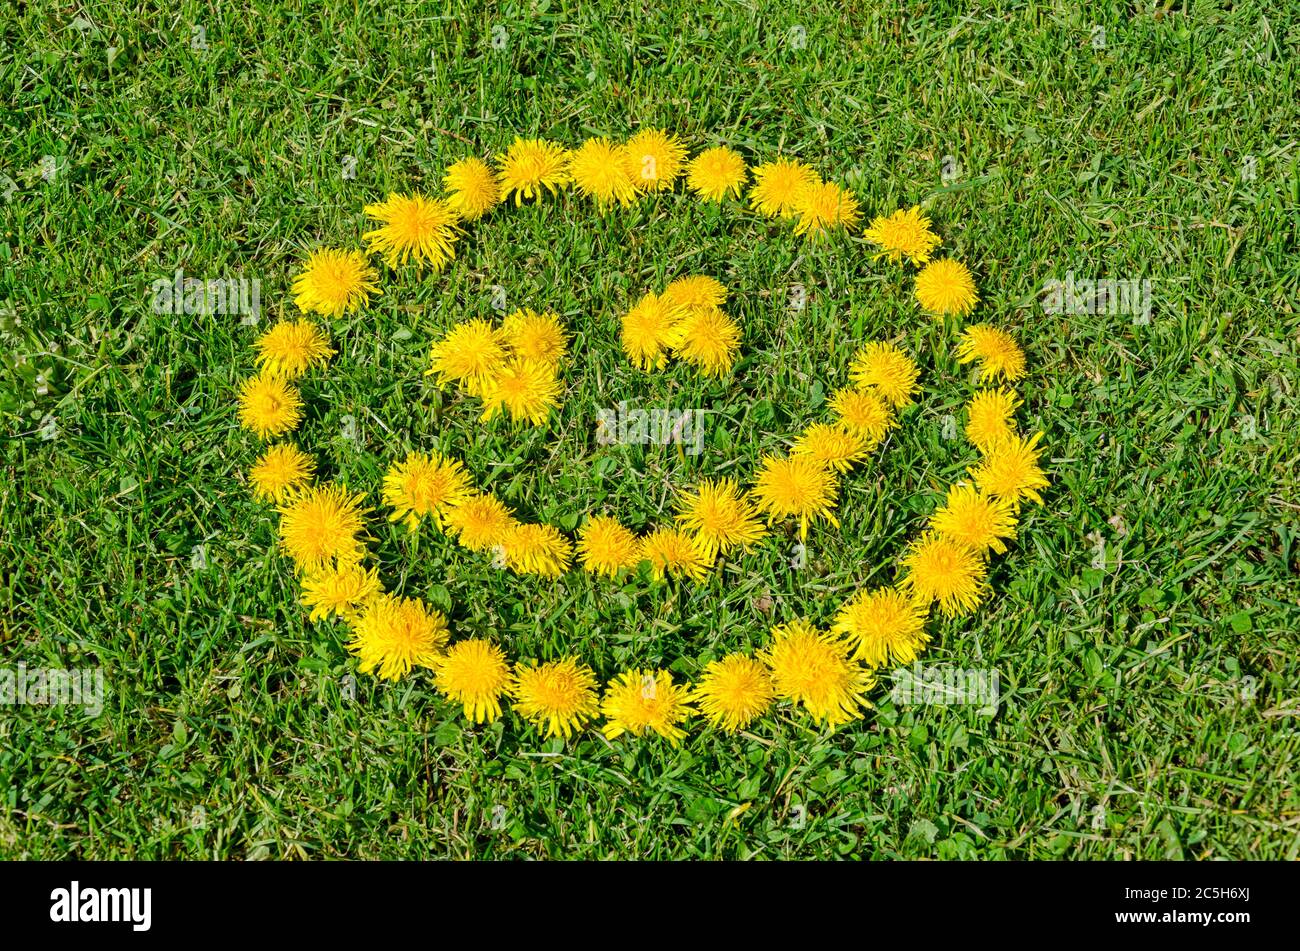 Smiling face made of dandelion flowers on a grass meadow Stock Photo